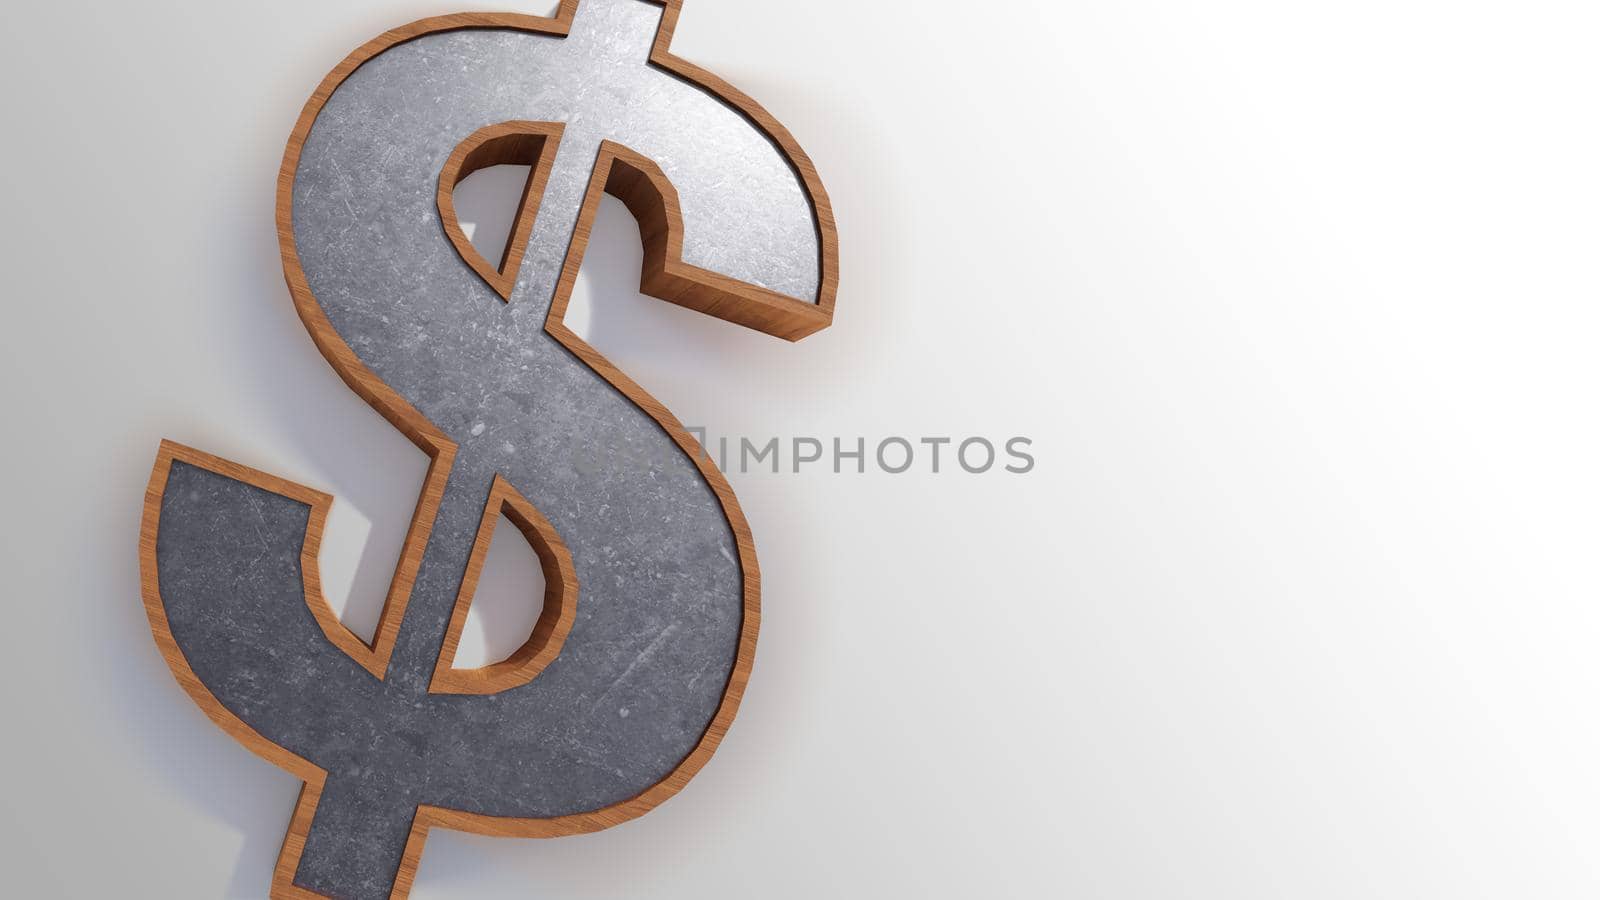 A 3d rendering image of US dollar sign made from steel and wood.